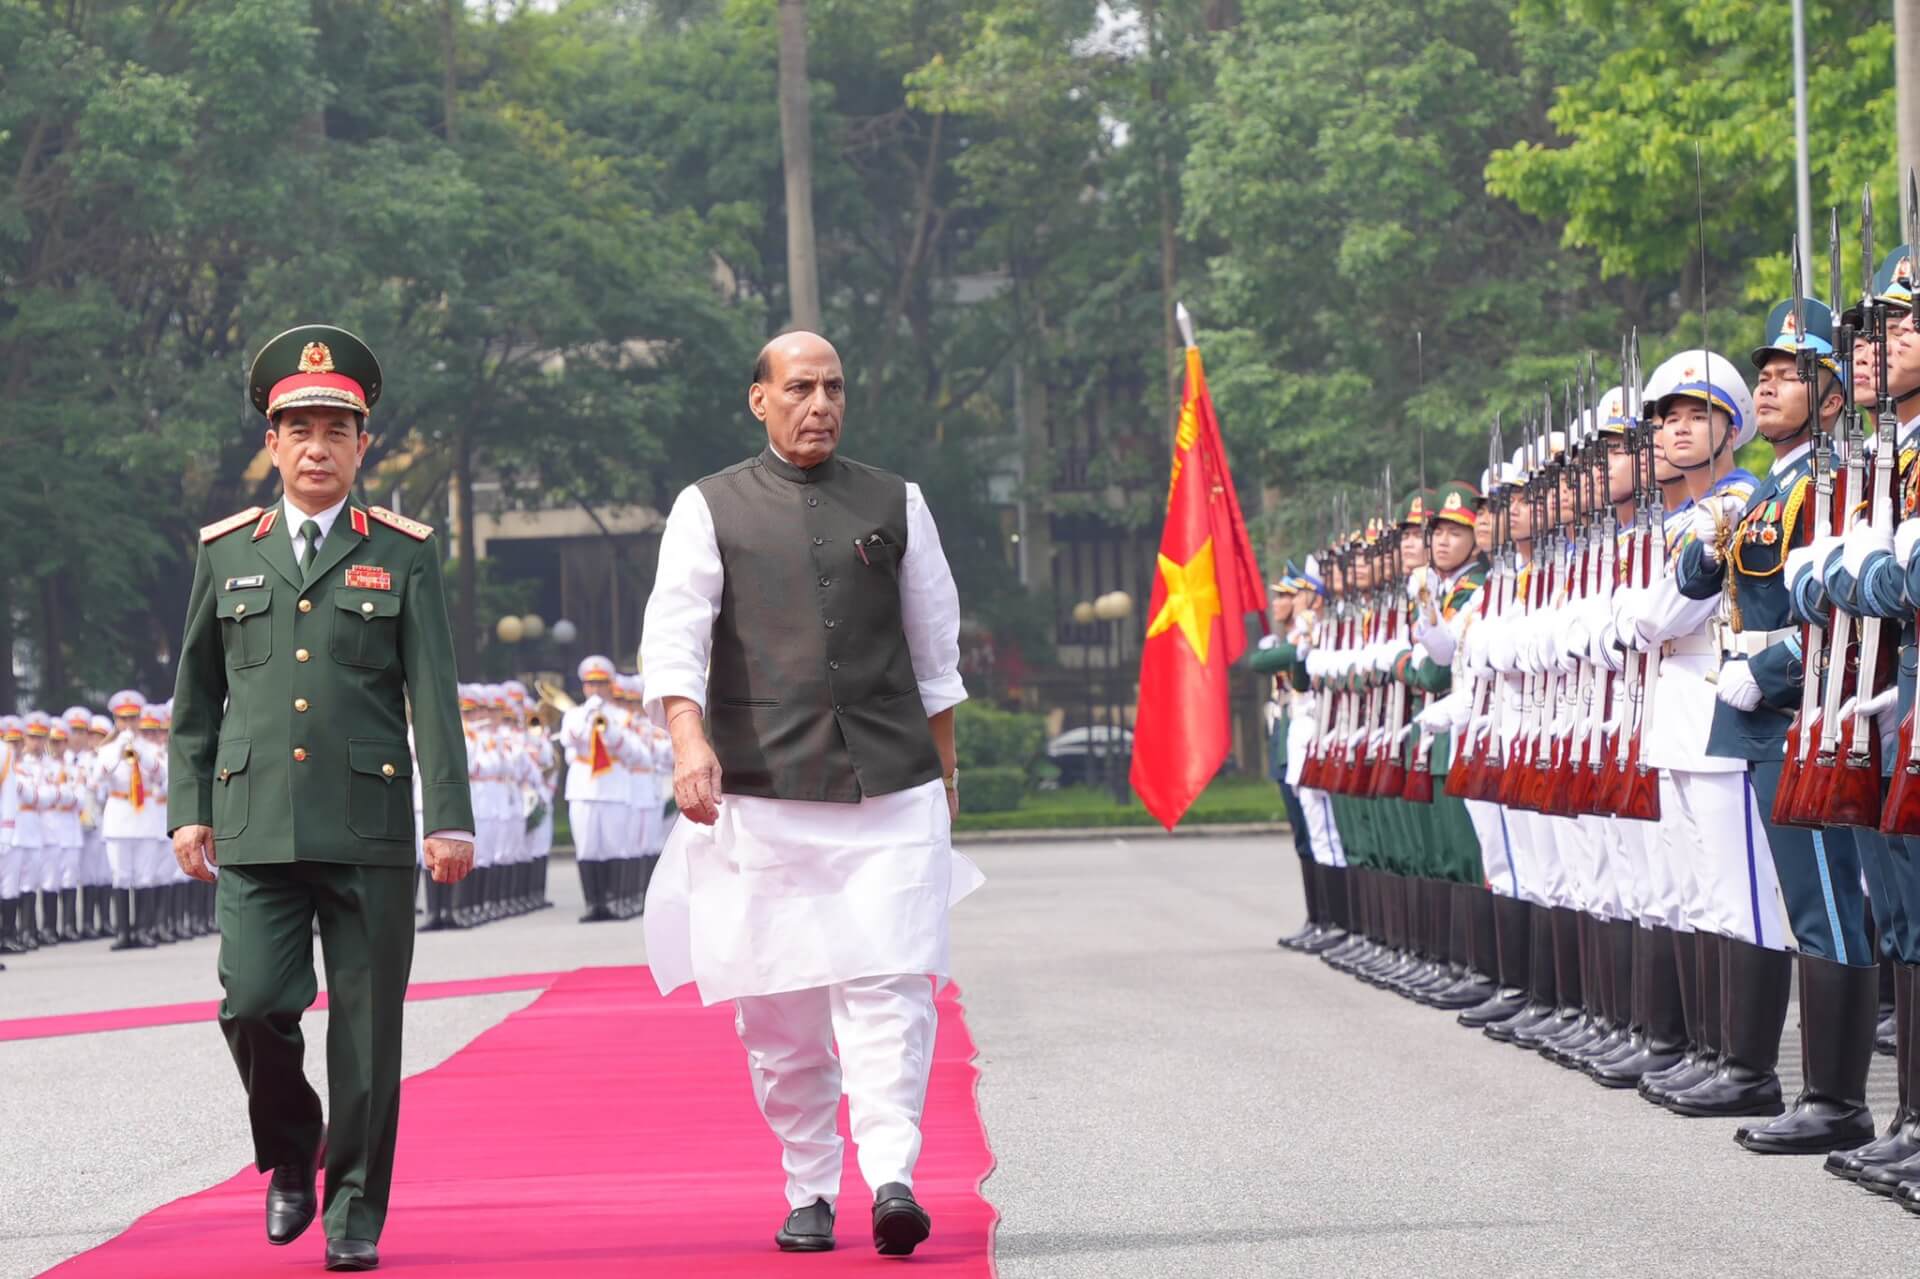 Vietnam Calls on India to Leverage “Major Power” Status After Signing New Defence Deal